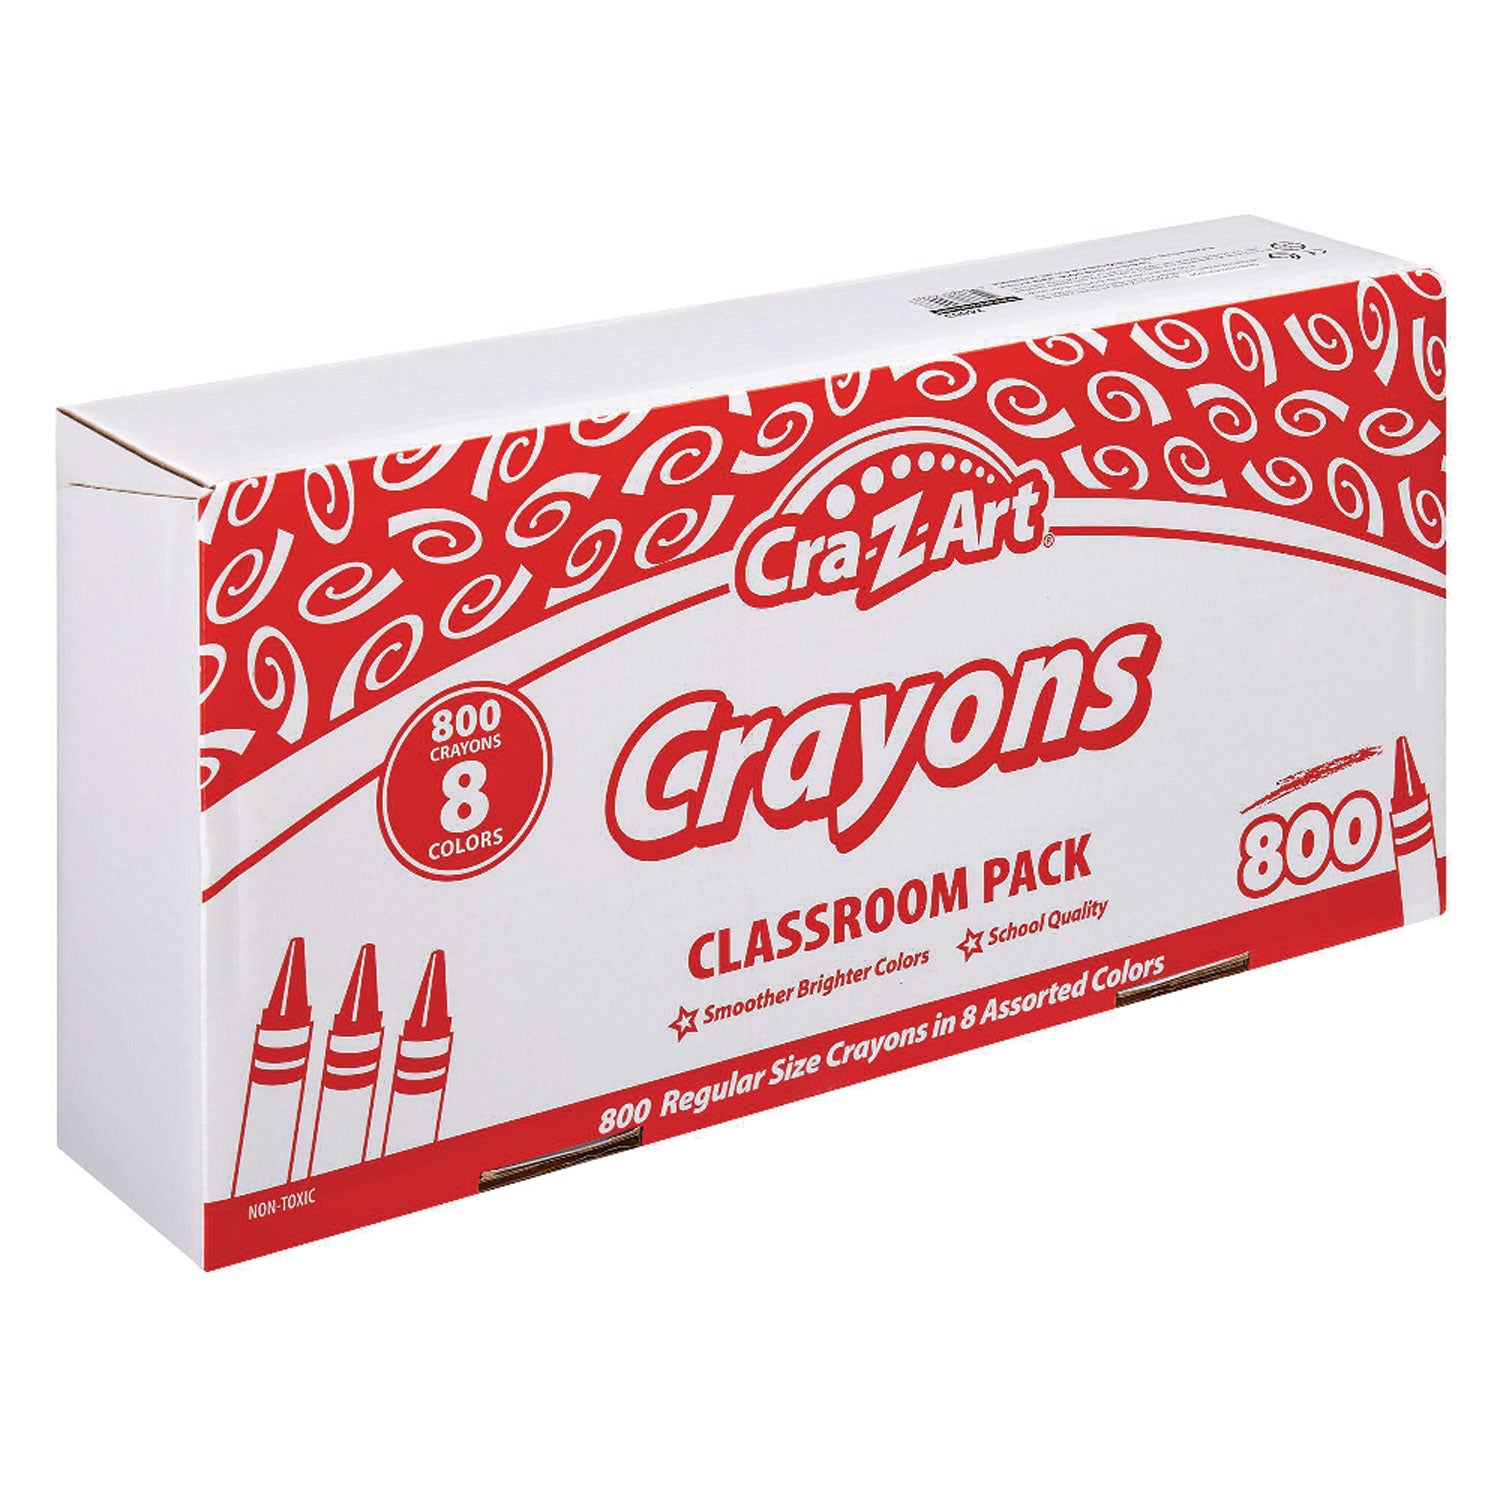 Crayons, 8 Assorted Colors, 800/Pack - 2